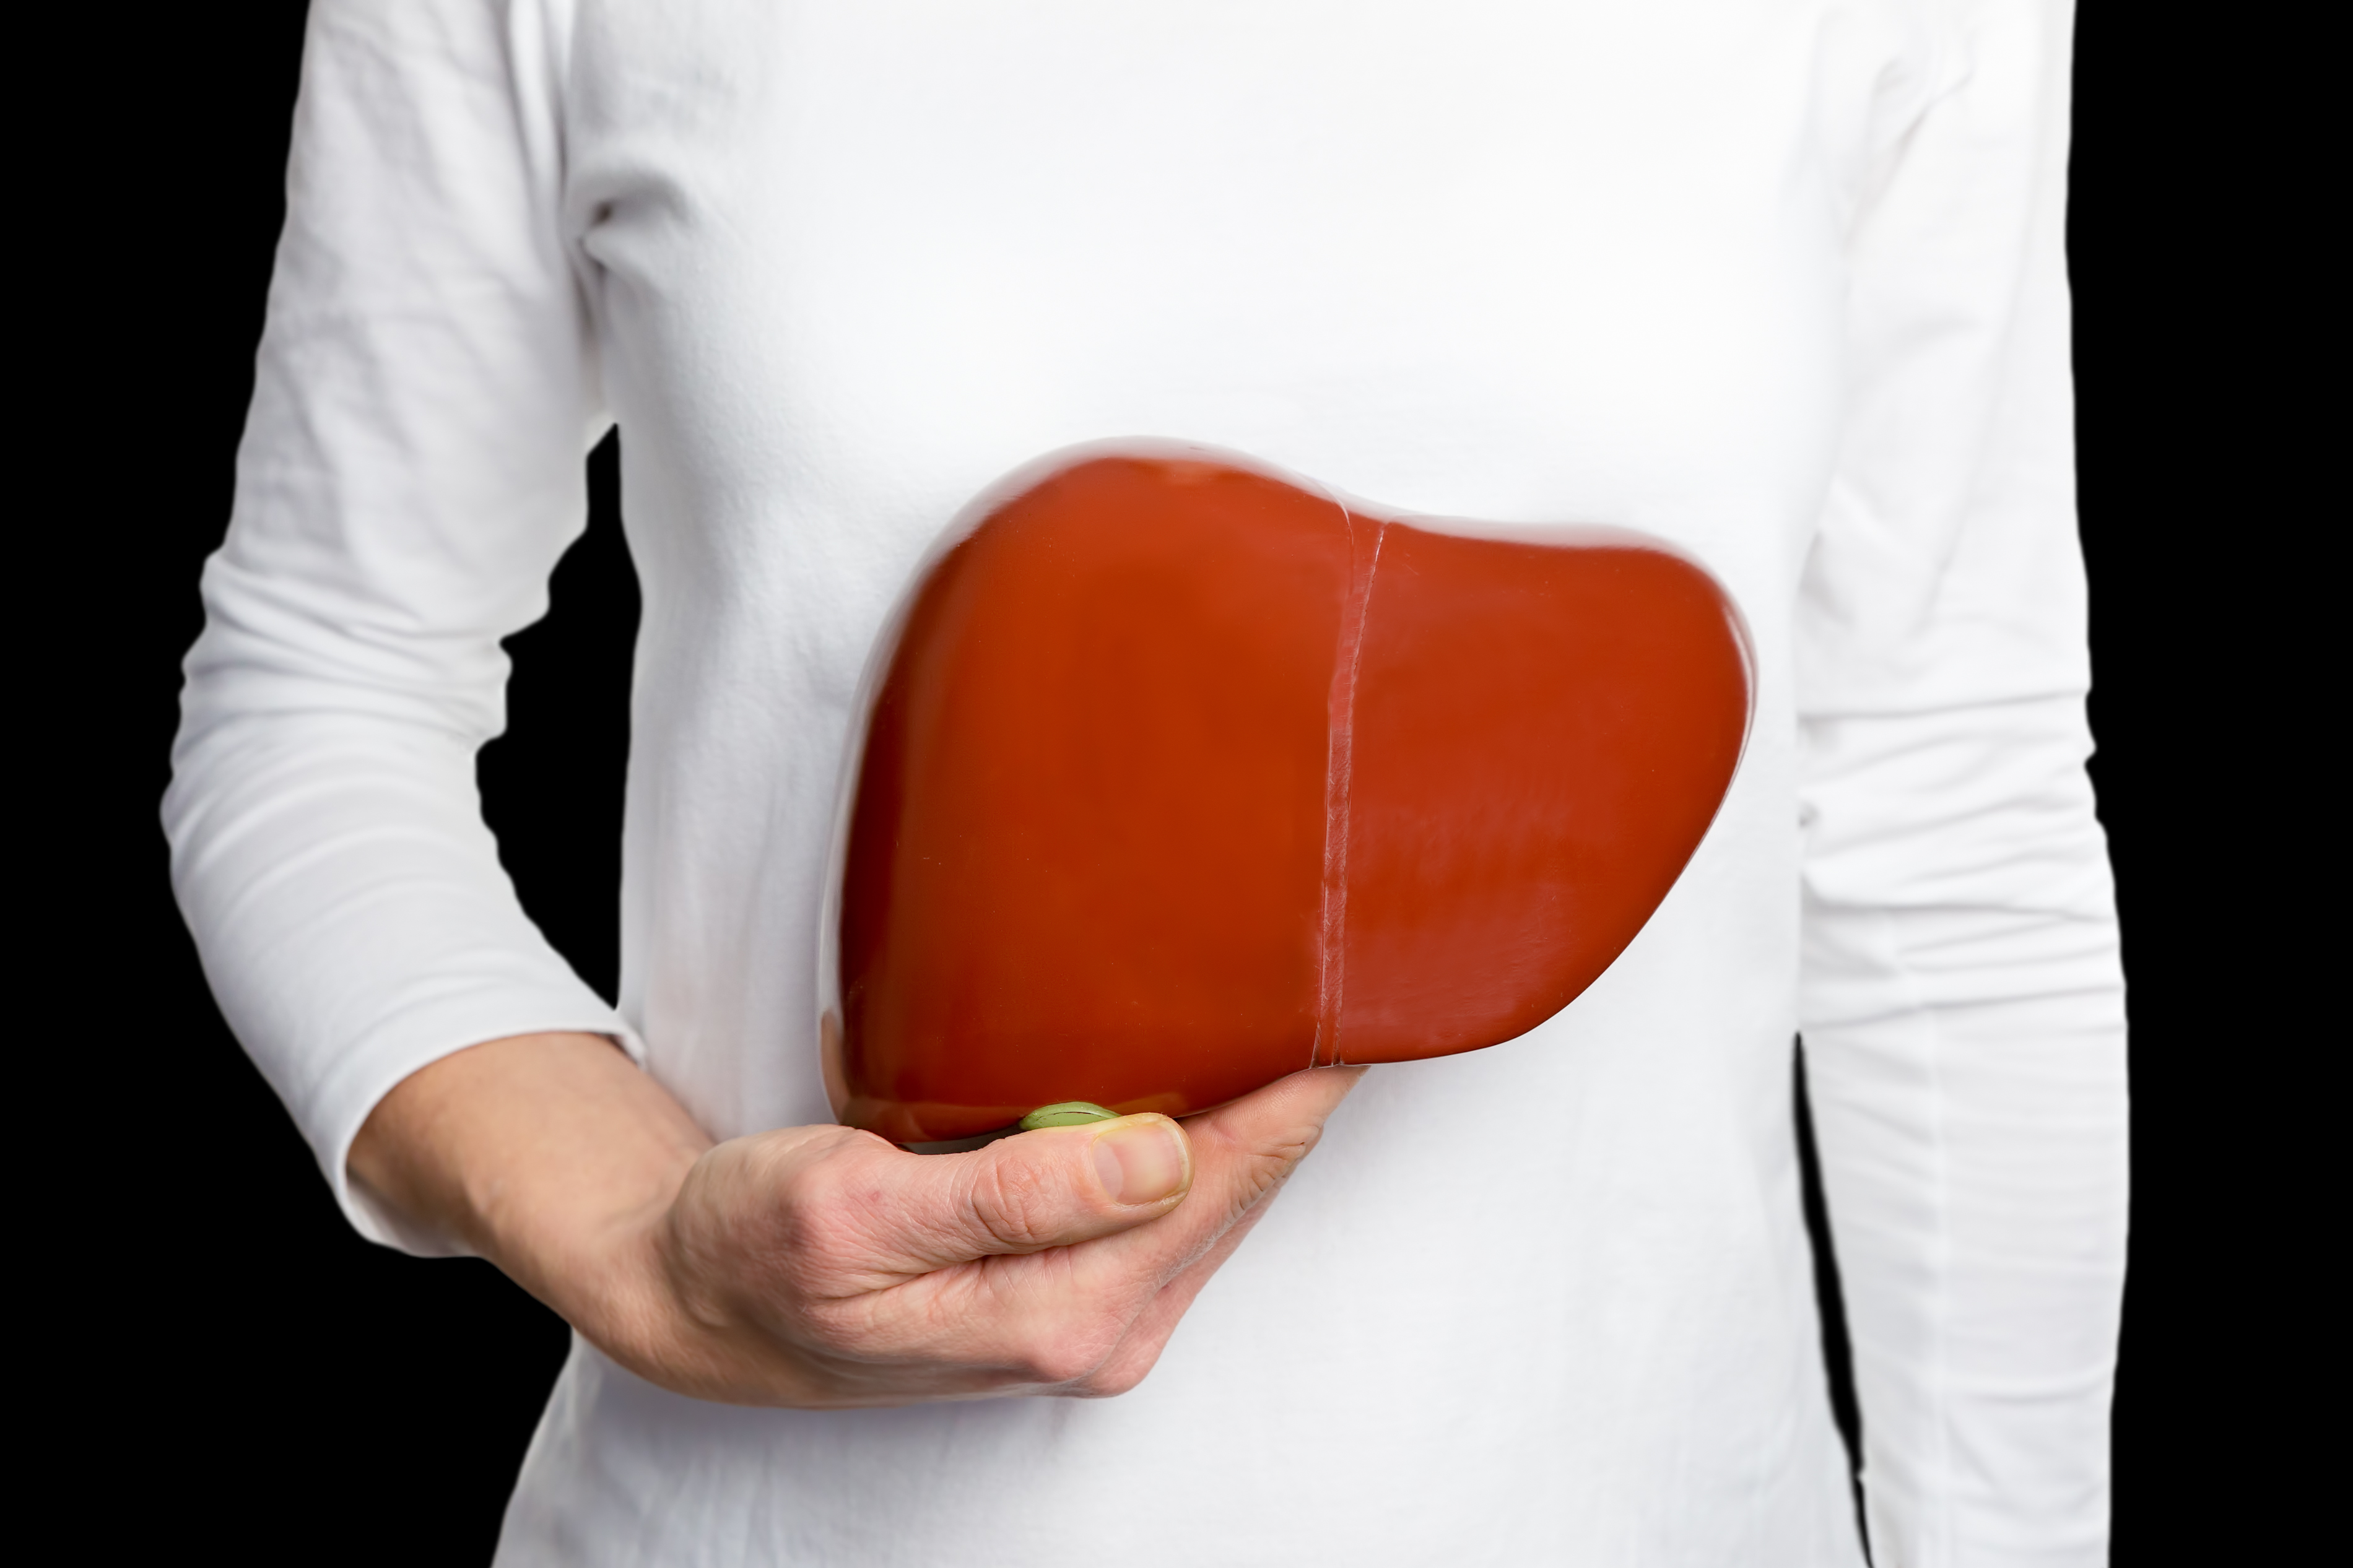 Do You Have Liver Disease?